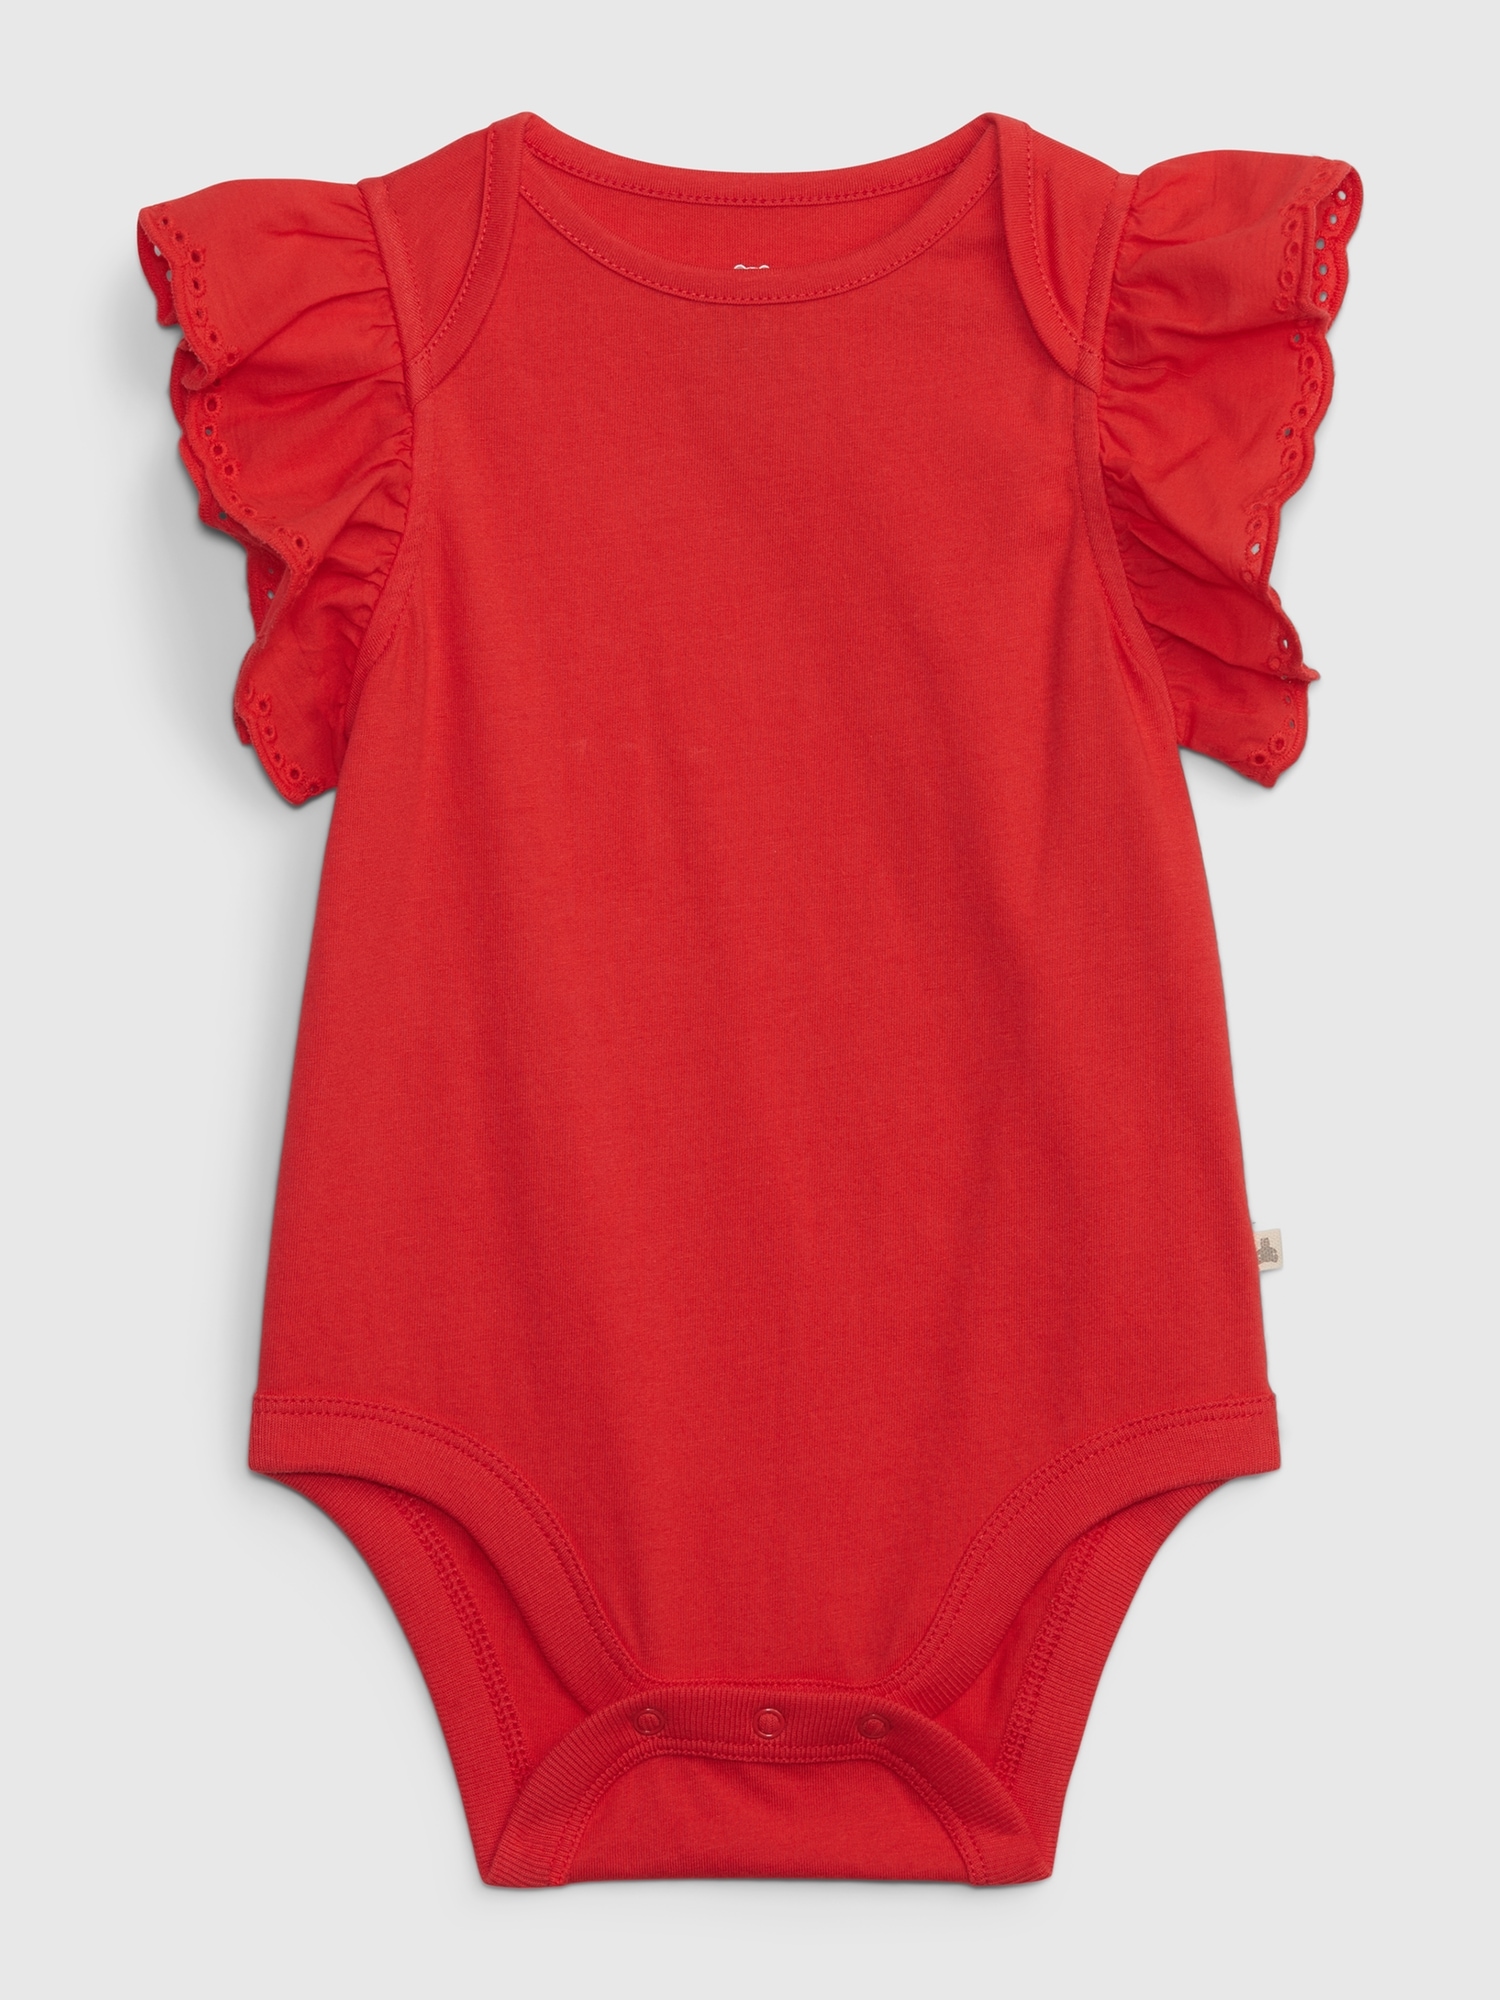 Gap Baby Organic Cotton Mix and Match Flutter Bodysuit red. 1